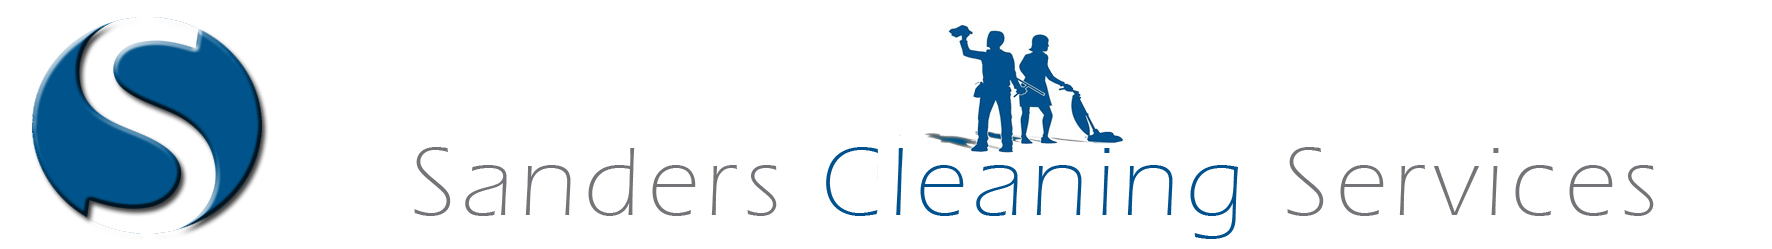 Sanders Cleaning Services